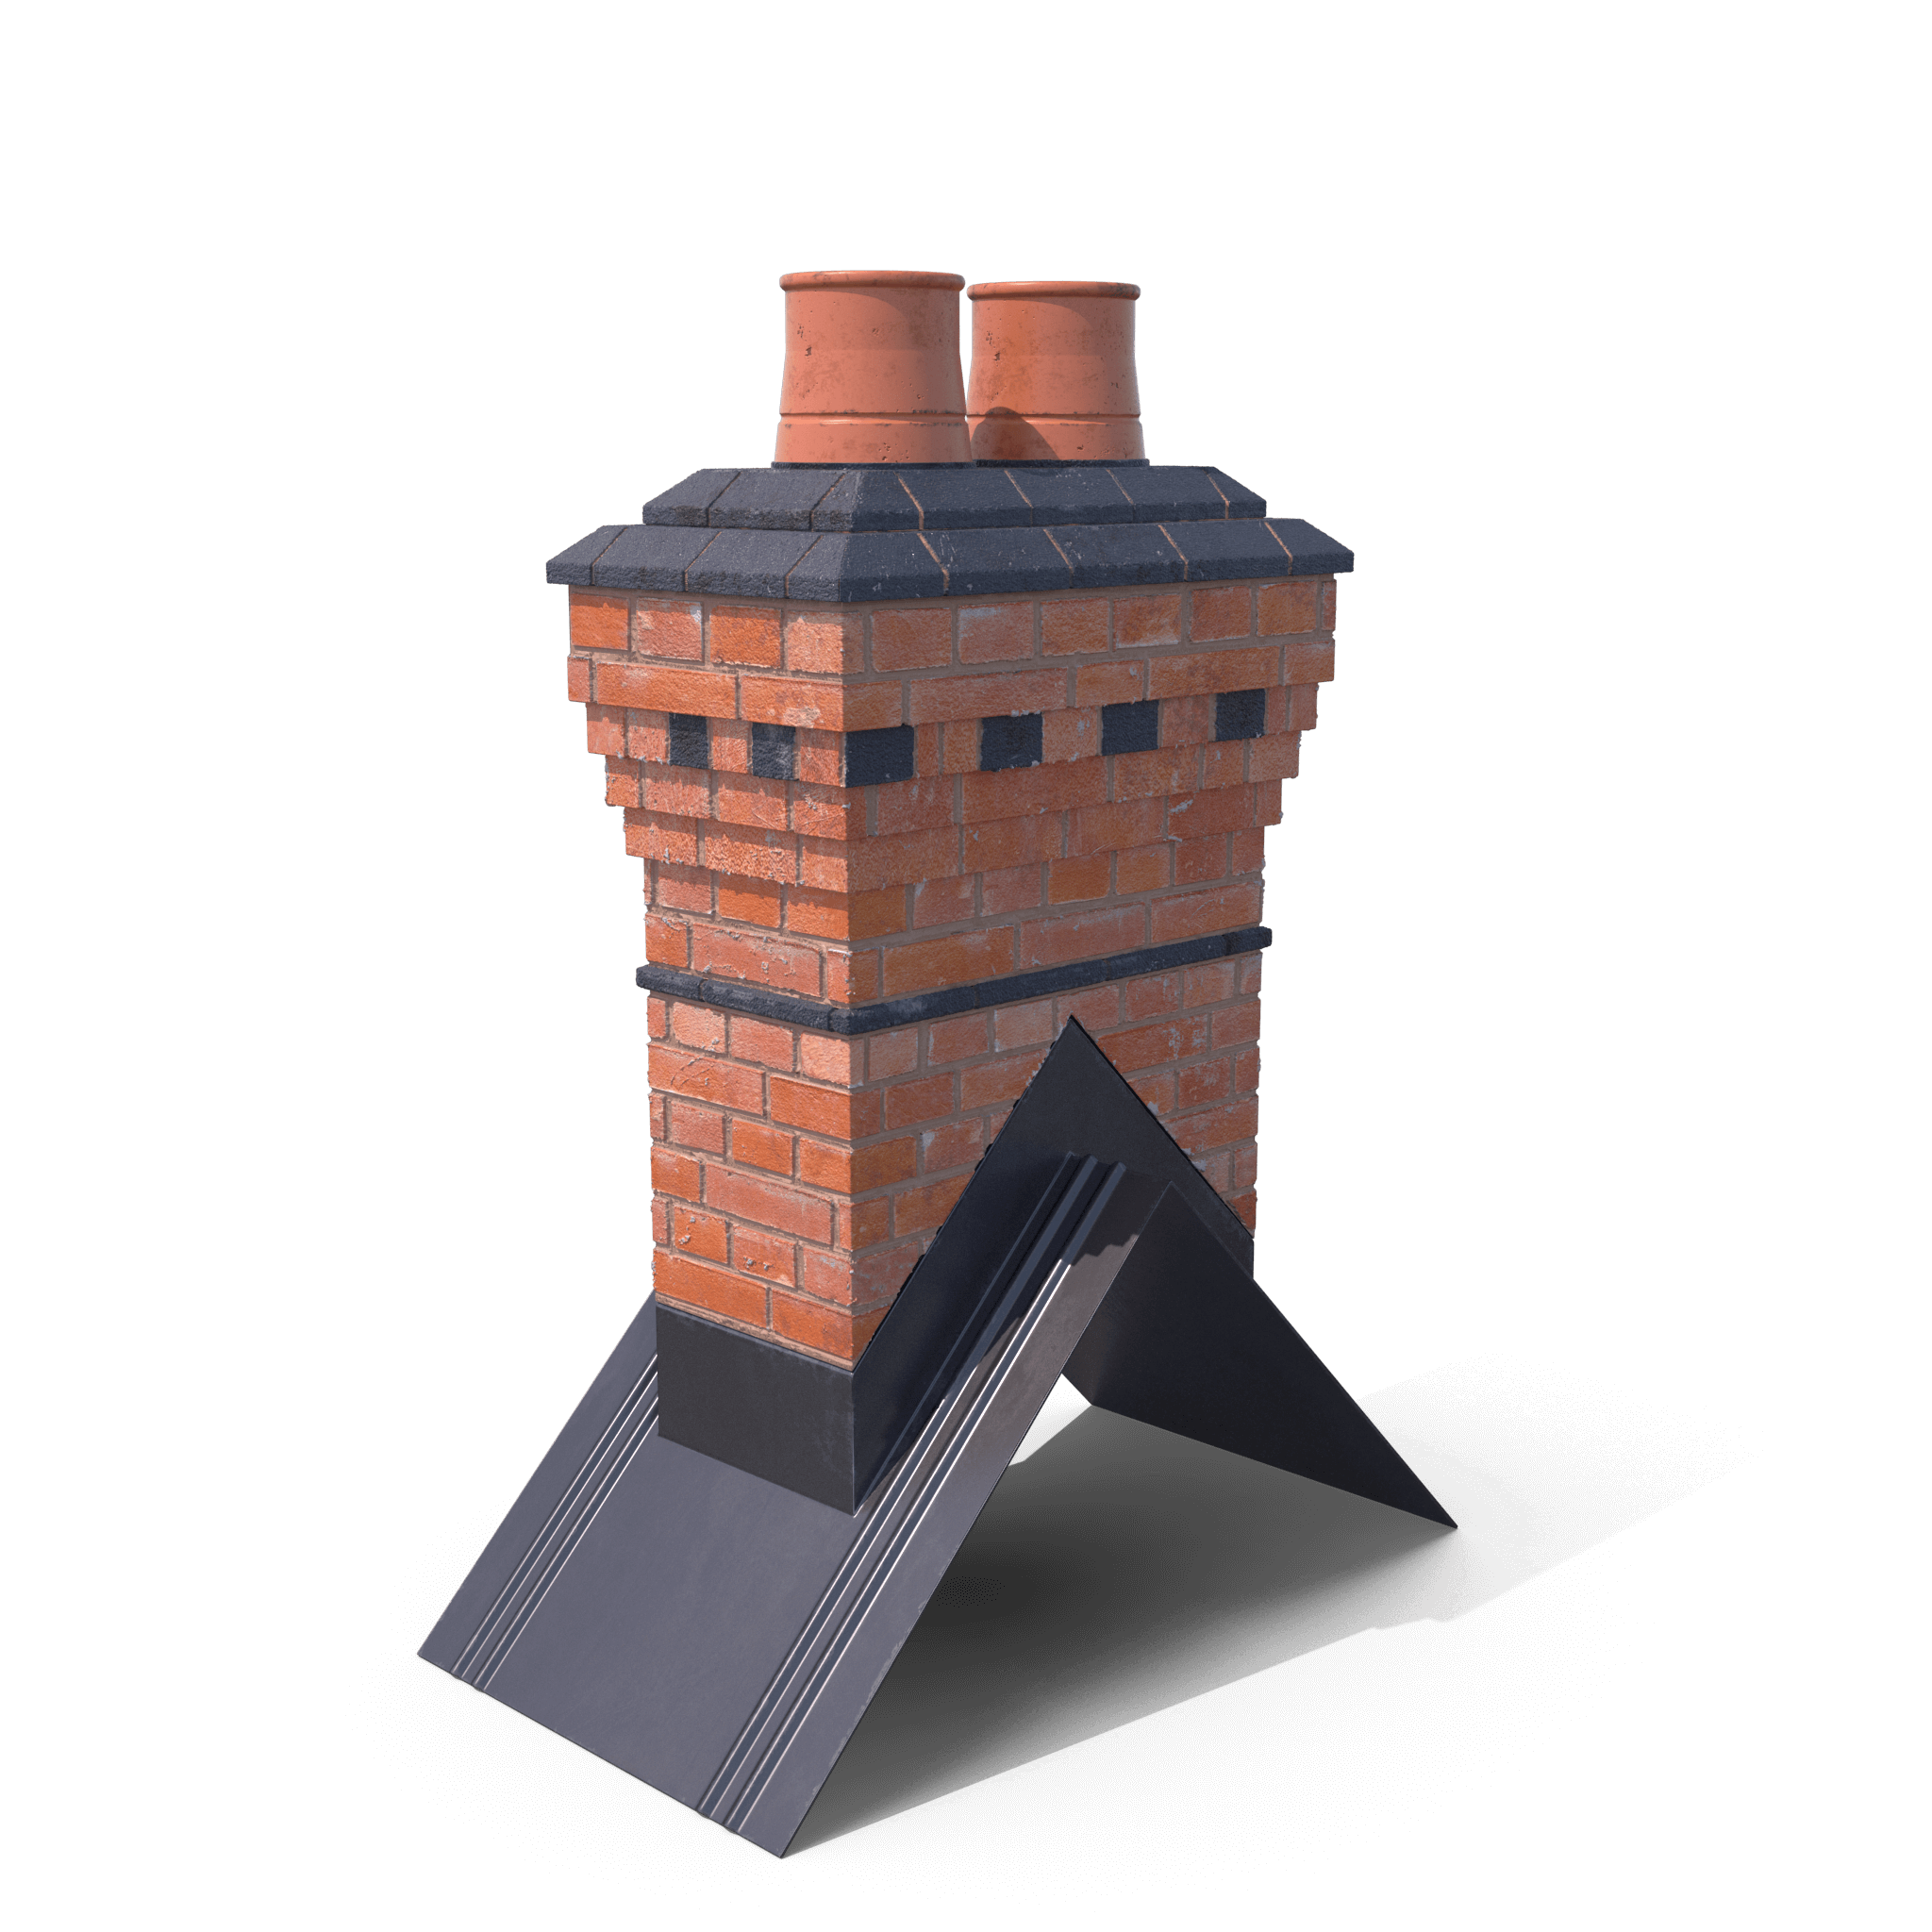 3D modelling your roof